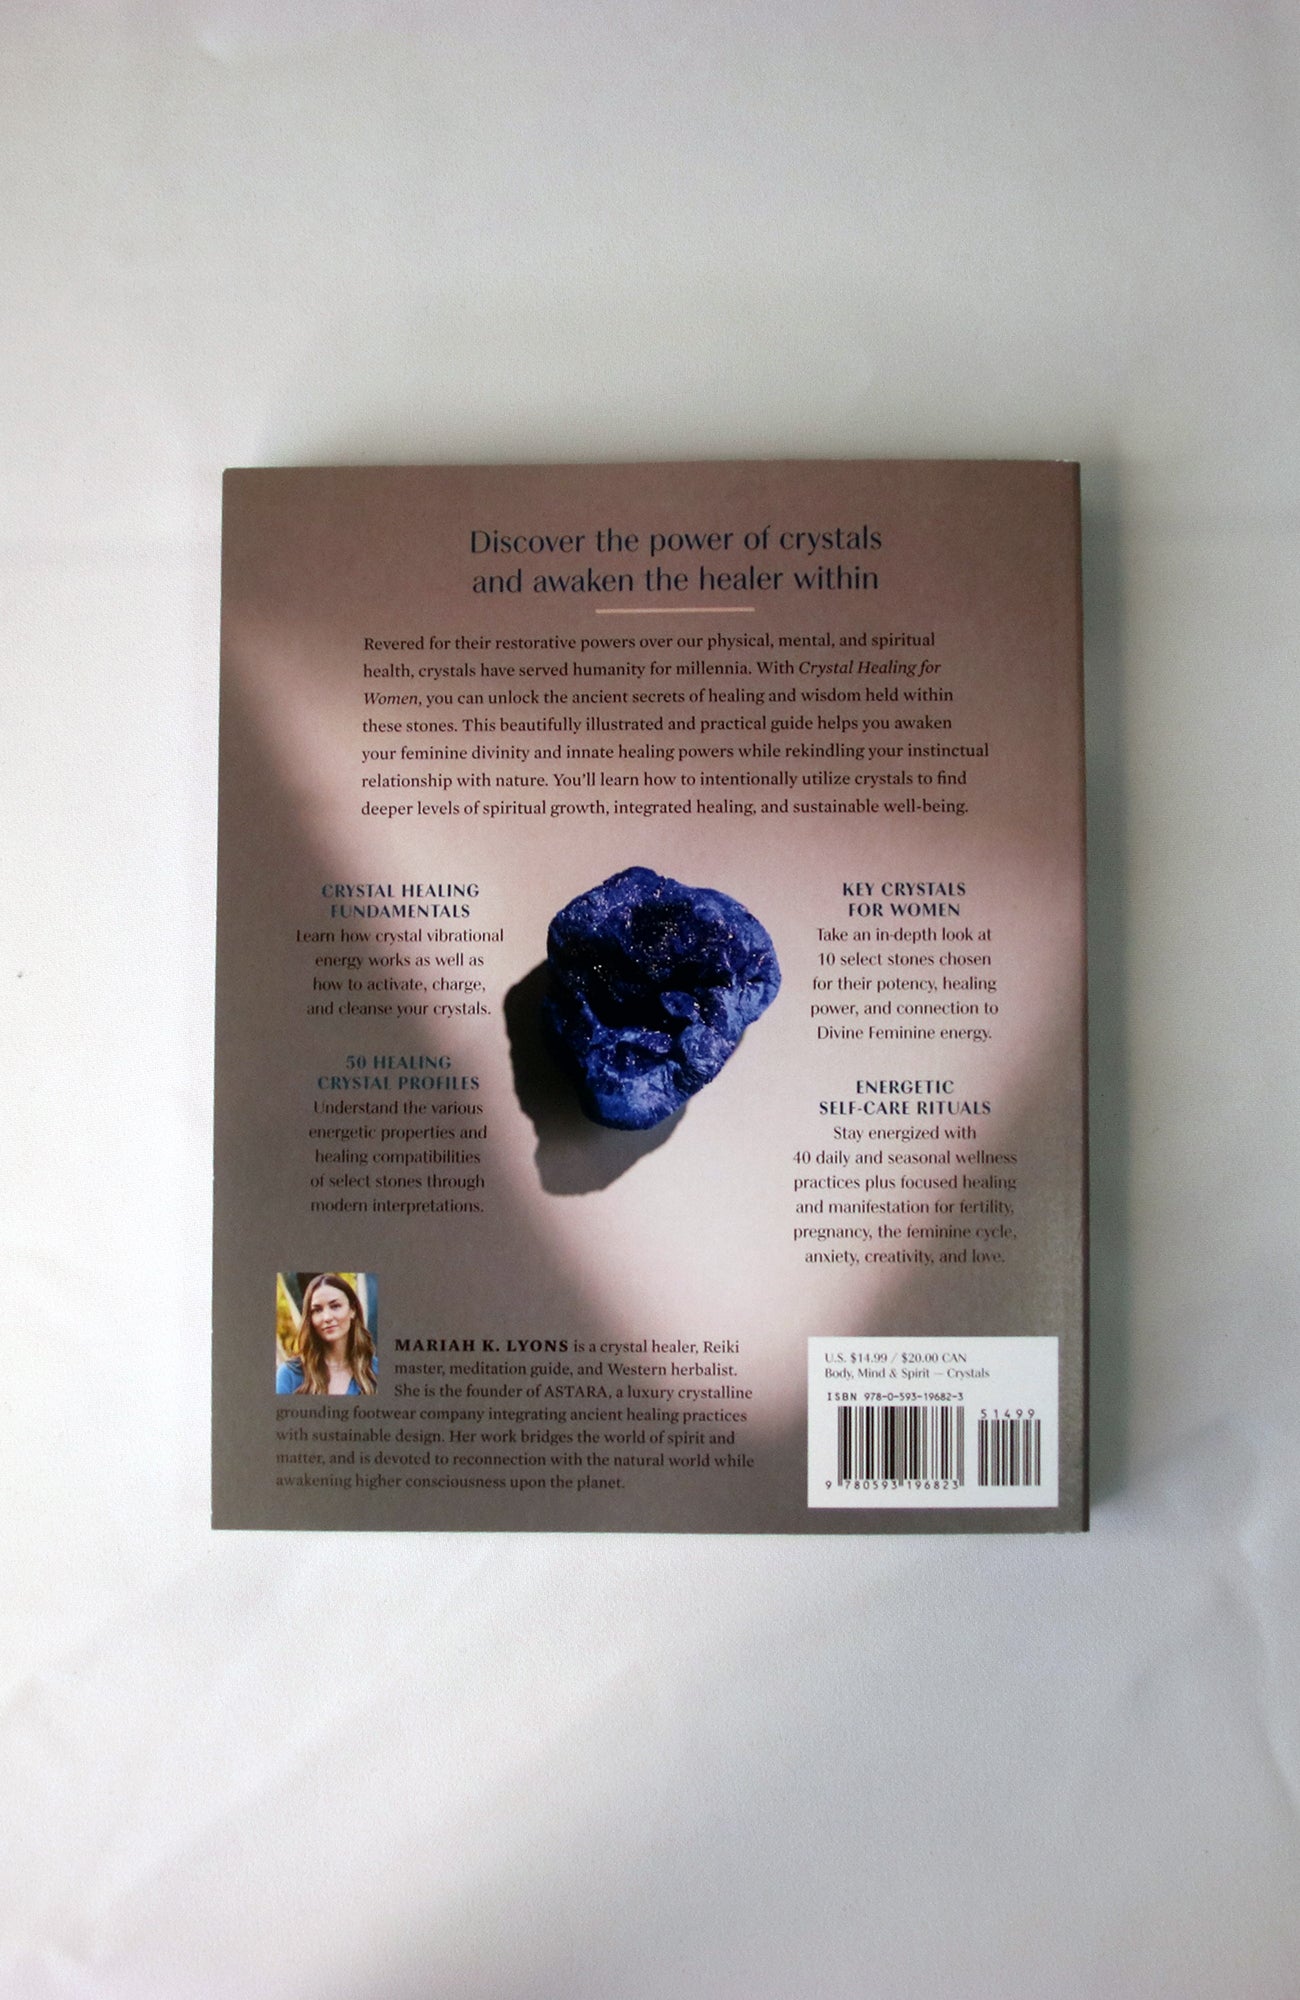 Crystal Healing for Women: A Modern Guide to the Power of Crystals for Renewed Energy, Strength, and Wellness